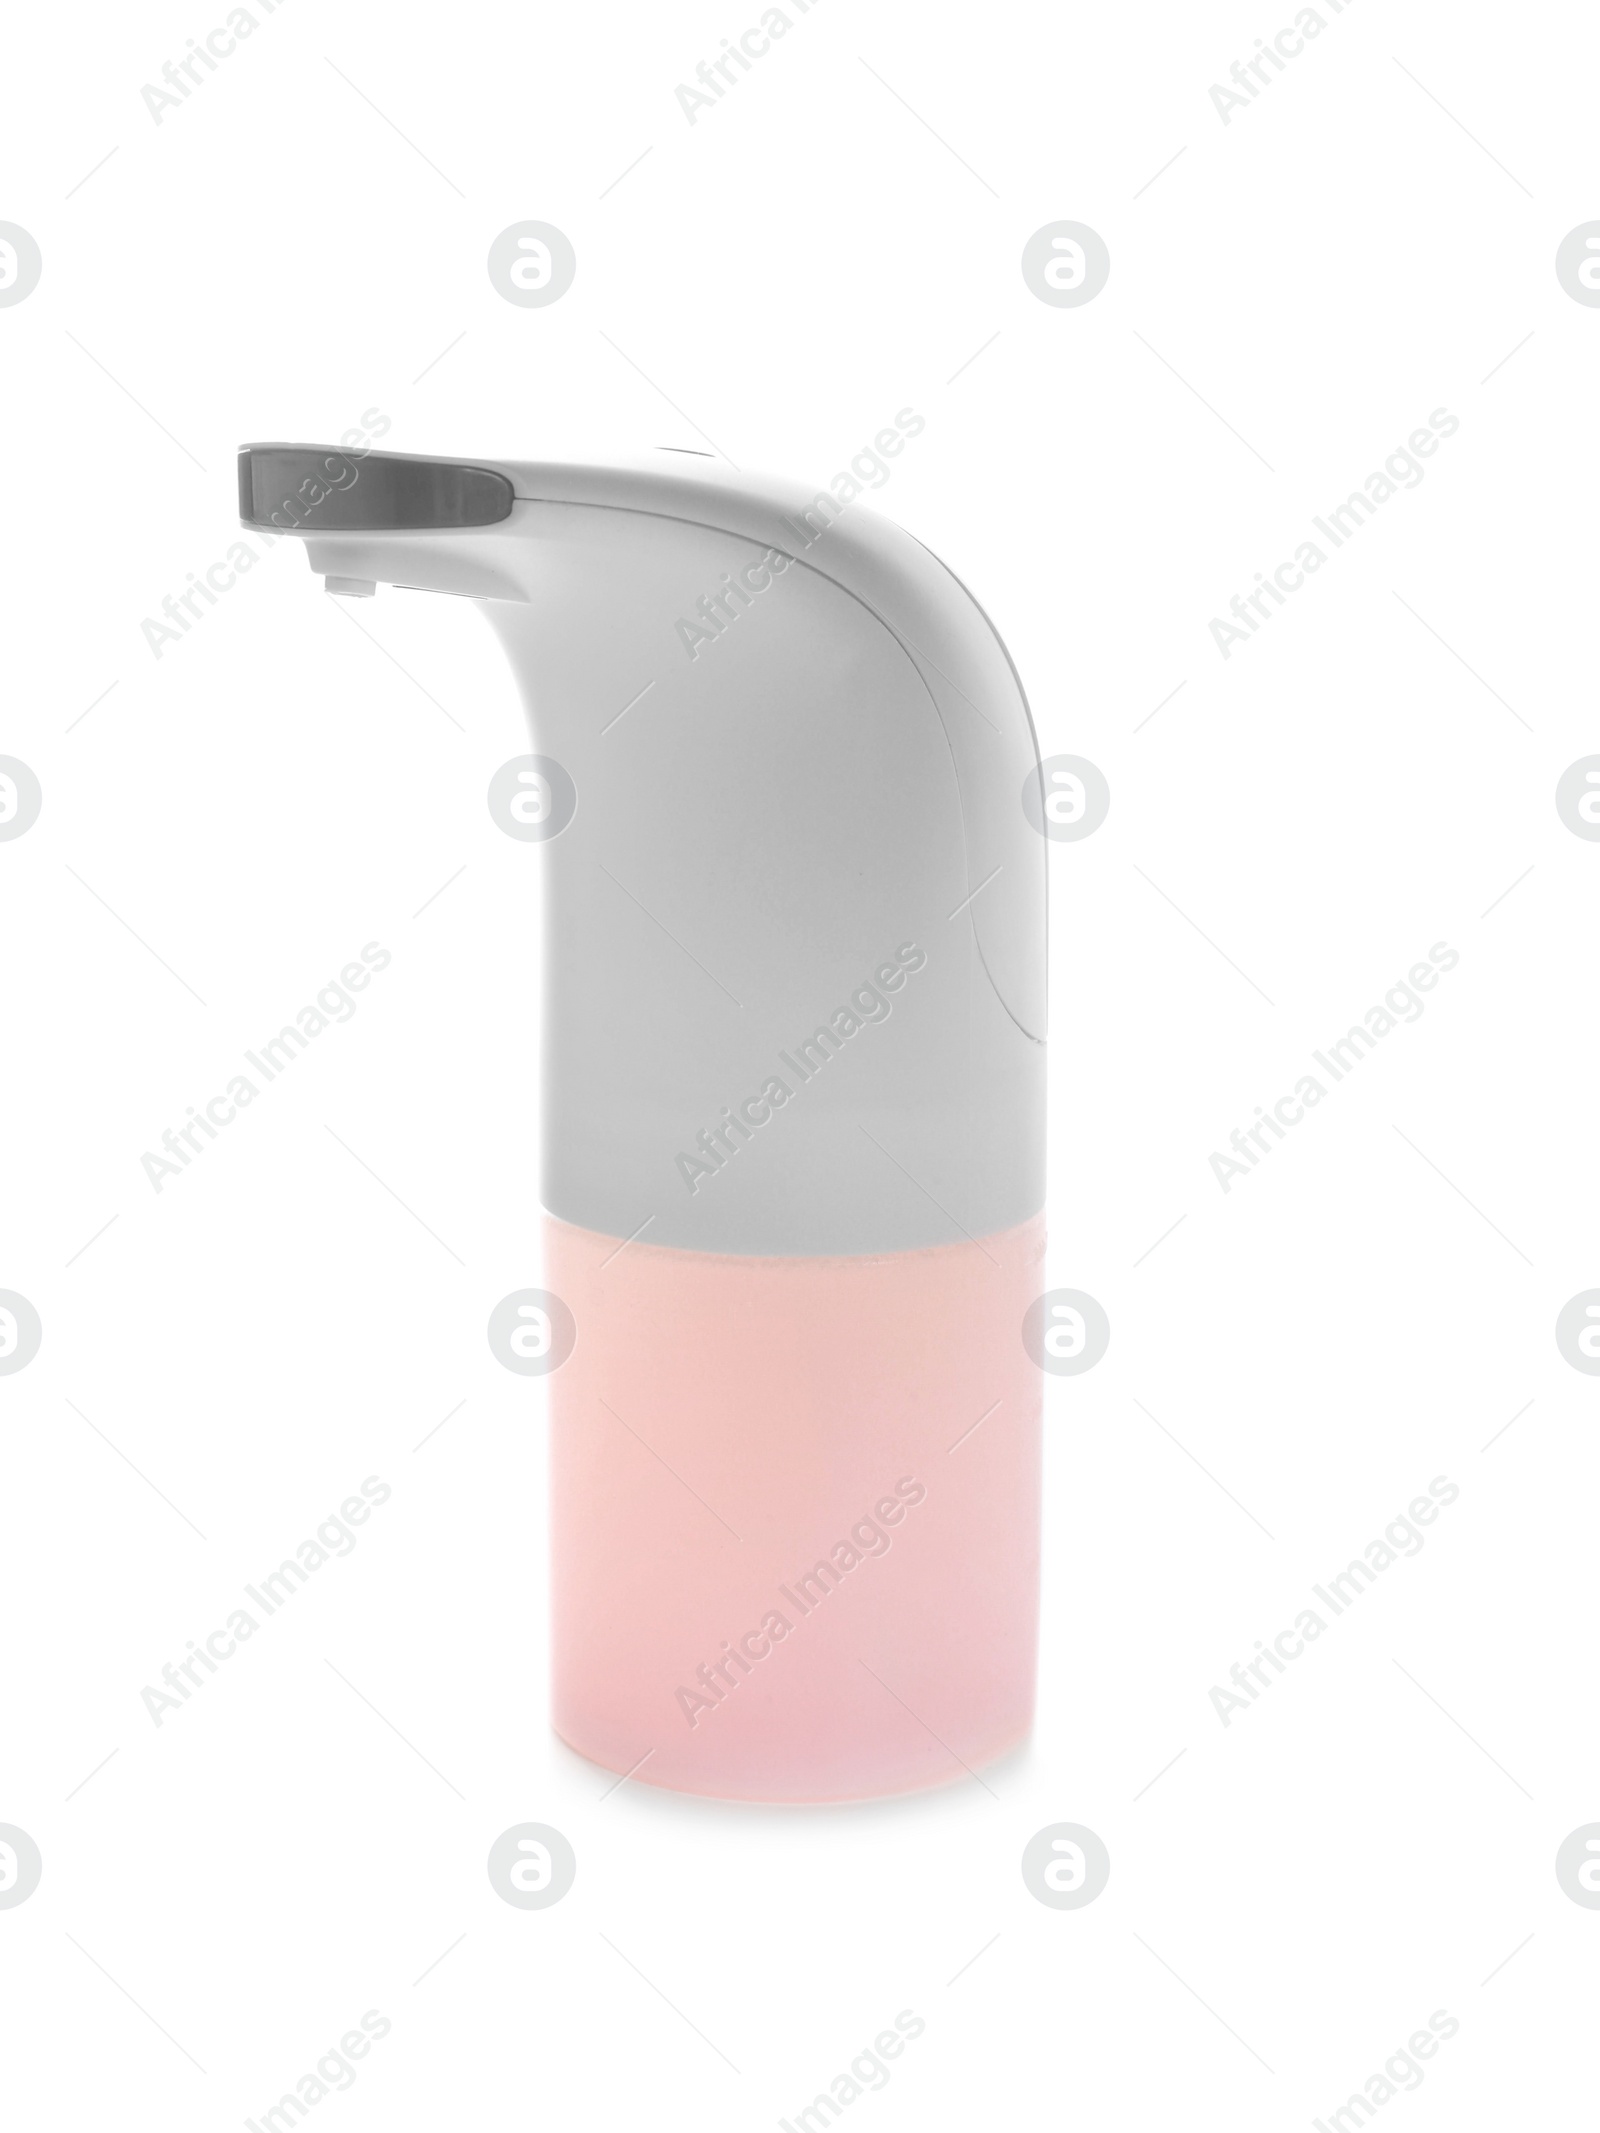 Photo of Modern automatic soap dispenser isolated on white